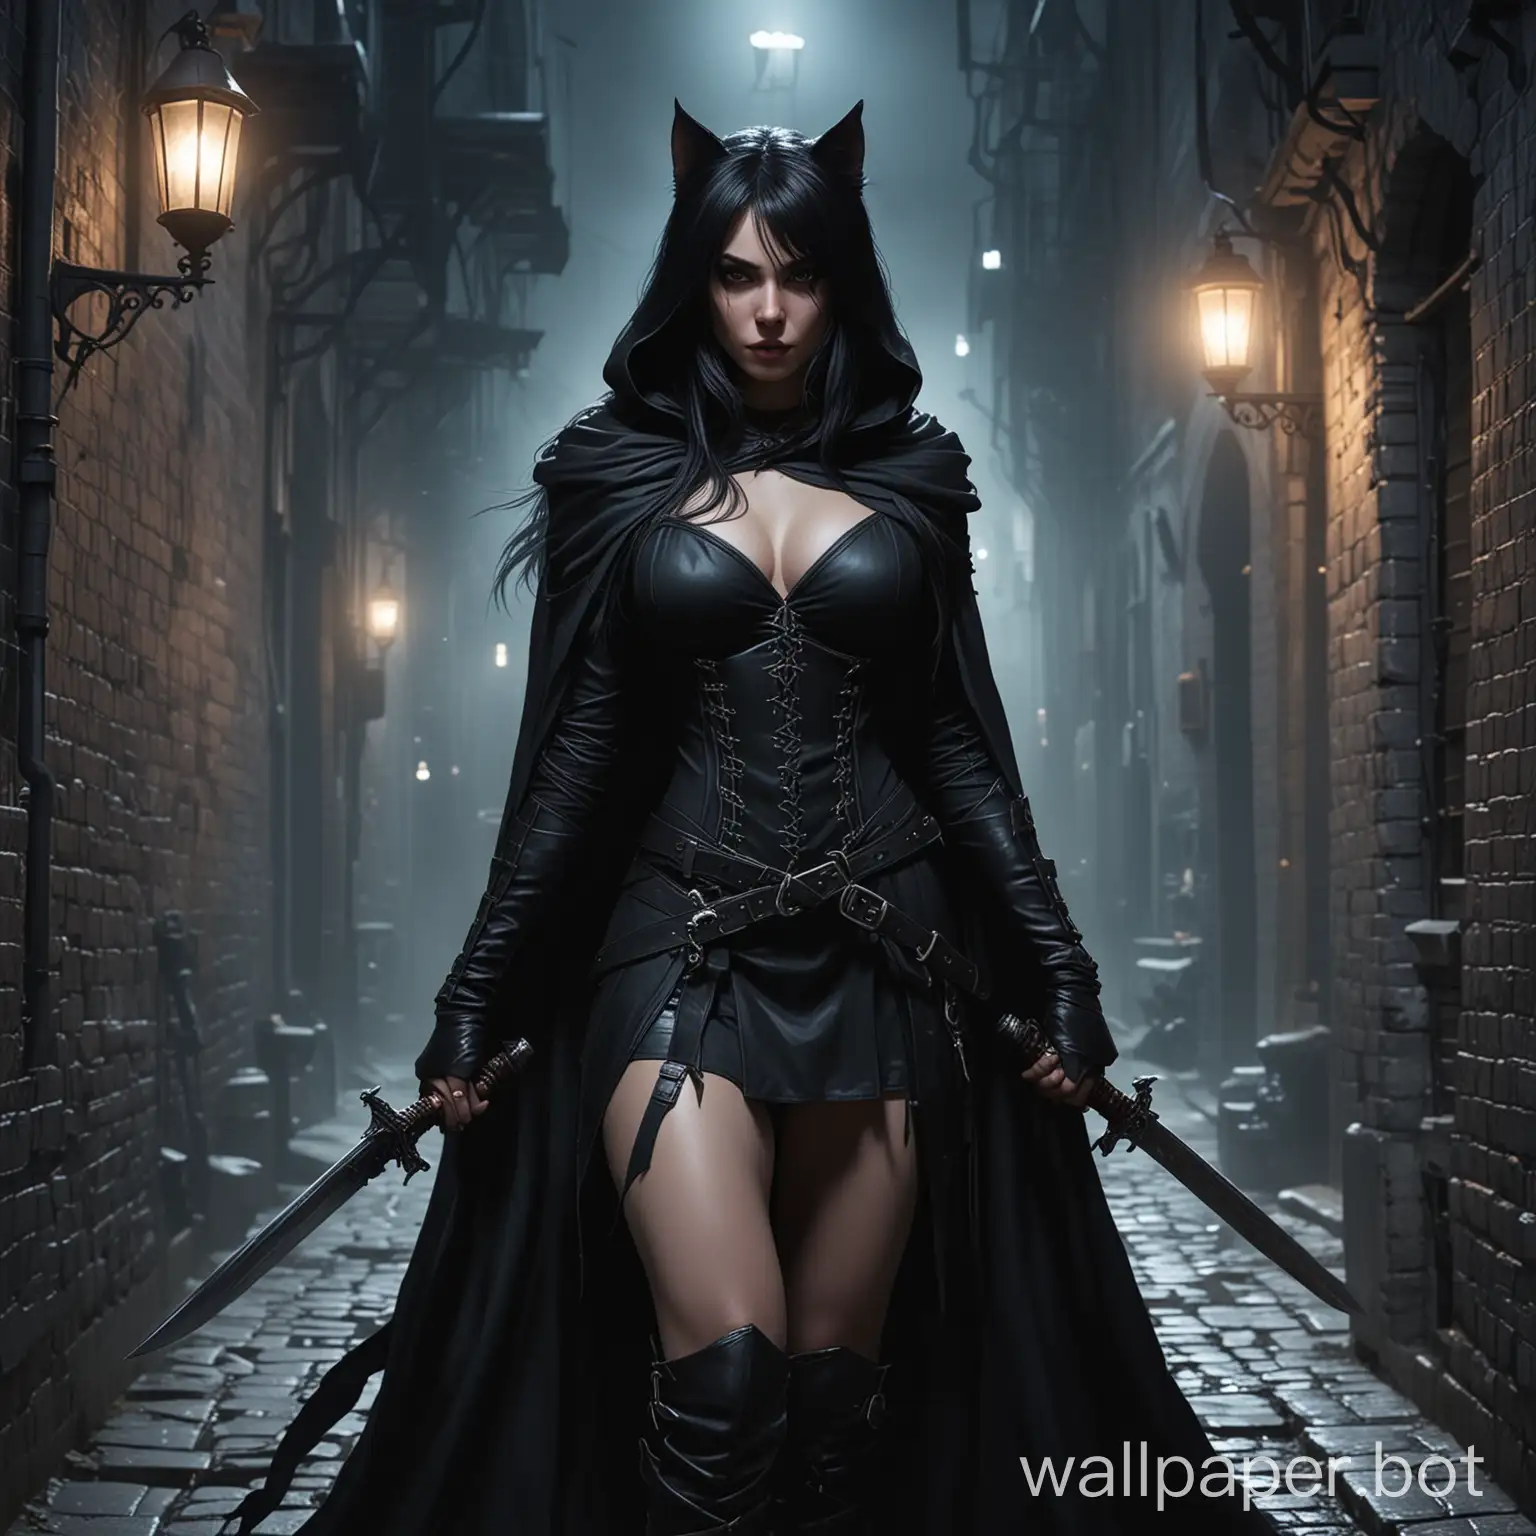 A catgirl Assassin, with pale skin and long black hair standing in a dark alley, at night, wearing a dark cloak. The theme is the middle ages. she has a dagger in each hand.